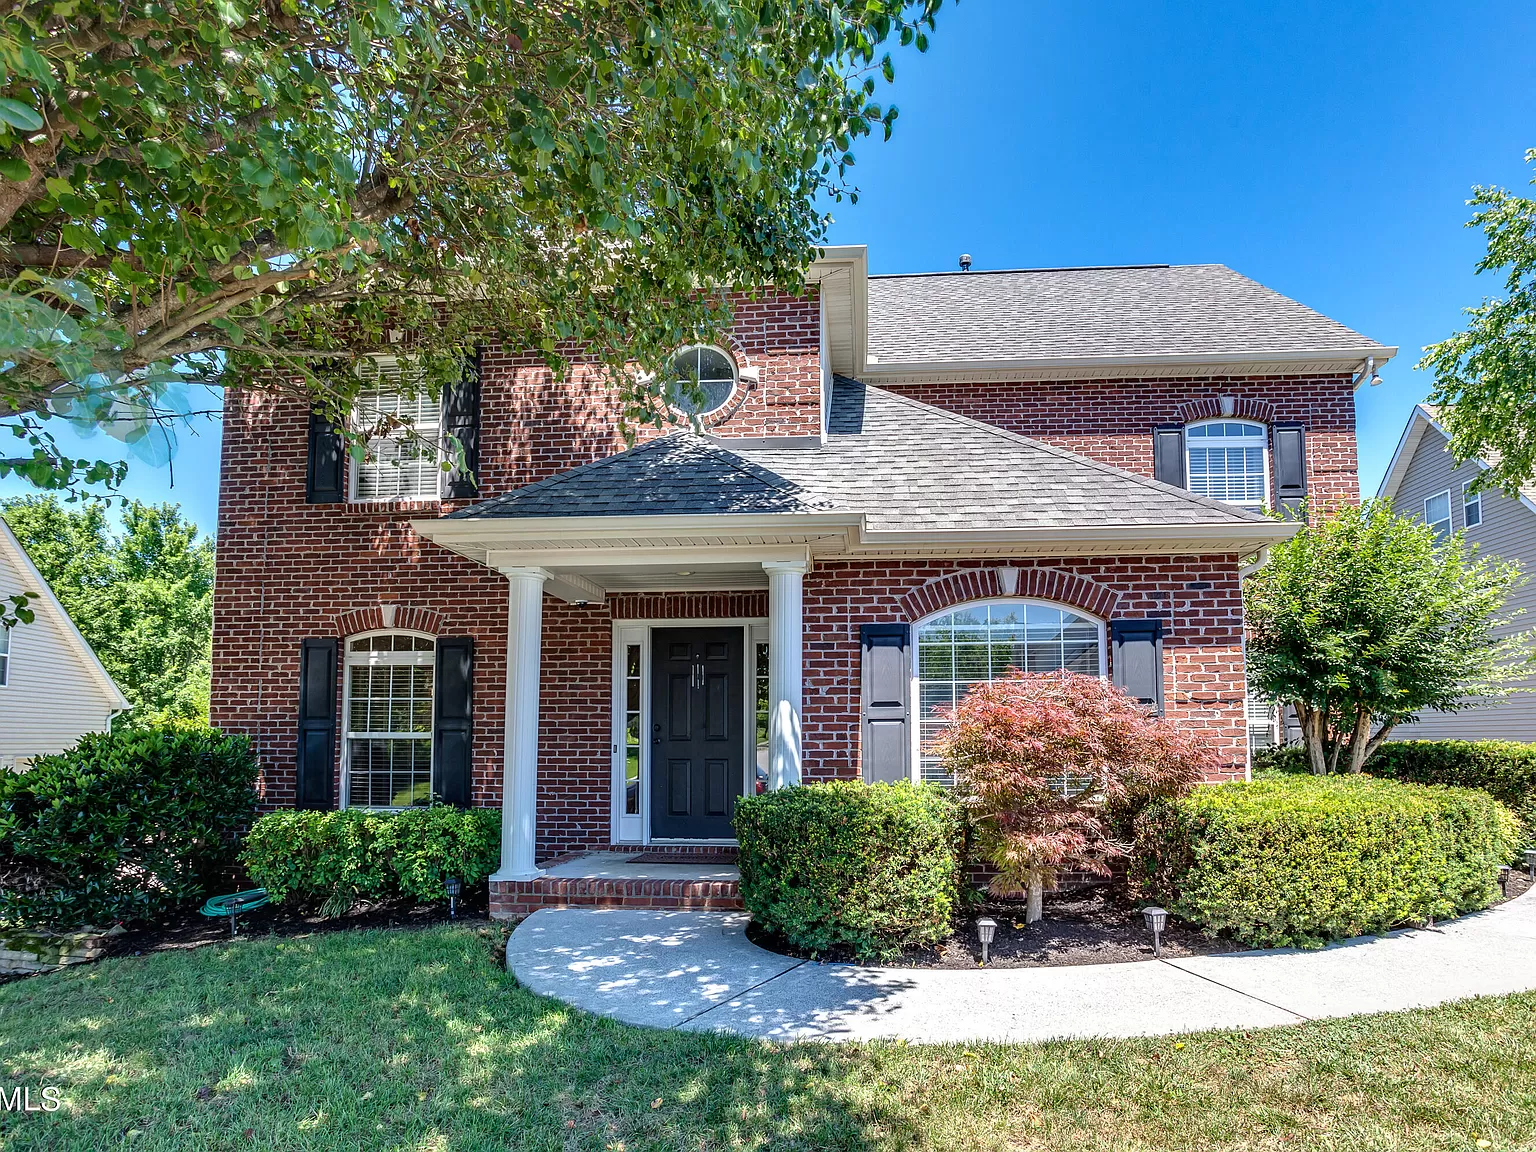 12505 Coral Reef Cir, Knoxville, TN 37922 | Zillow